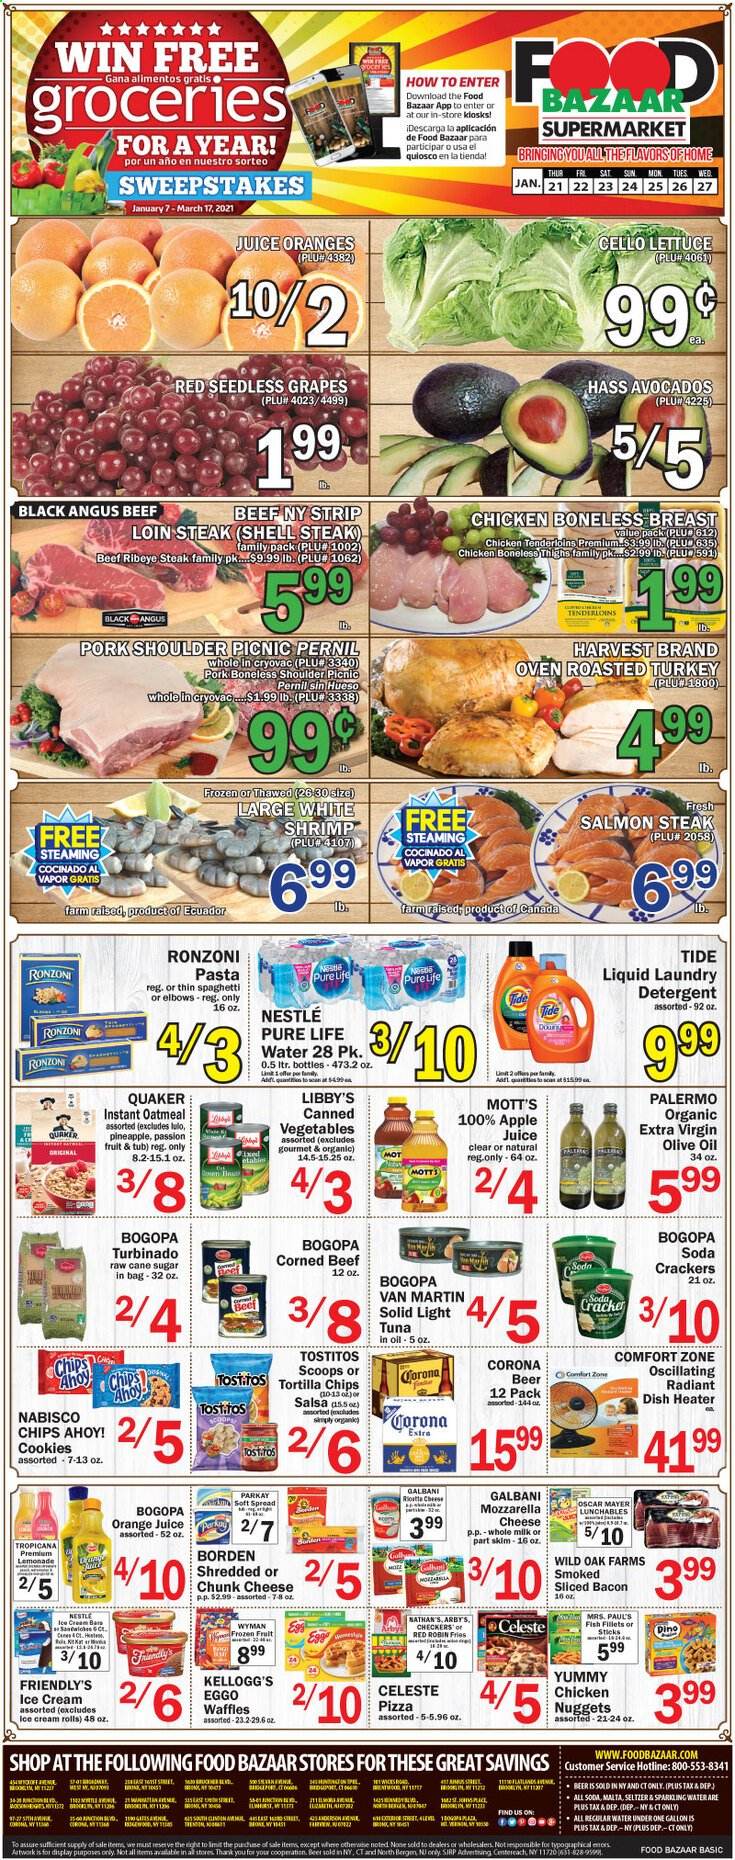 thumbnail - Food Bazaar Flyer - 01/21/2021 - 01/27/2021 - Sales products - lettuce, seedless grapes, waffles, fish fillets, salmon, tuna, fish, shrimps, pizza, nuggets, chicken nuggets, Quaker, Lunchables, bacon, mozzarella, cheese, Galbani, chunk cheese, milk, salsa, ice cream, Friendly's Ice Cream, potato fries, cookies, Nestlé, crackers, Kellogg's, Chips Ahoy!, tortilla chips, Tostitos, cane sugar, oatmeal, canned vegetables, light tuna, spaghetti, pasta, extra virgin olive oil, olive oil, apple juice, lemonade, orange juice, soda, juice, Mott's, seltzer water, sparkling water, Pure Life Water, Celeste, Ron Pelicano, beer, Corona Extra, beef meat, beef steak, corned beef, steak, sirloin steak, ribeye steak, pork meat, pork shoulder, avocado, grapes, pineapple. Page 1.